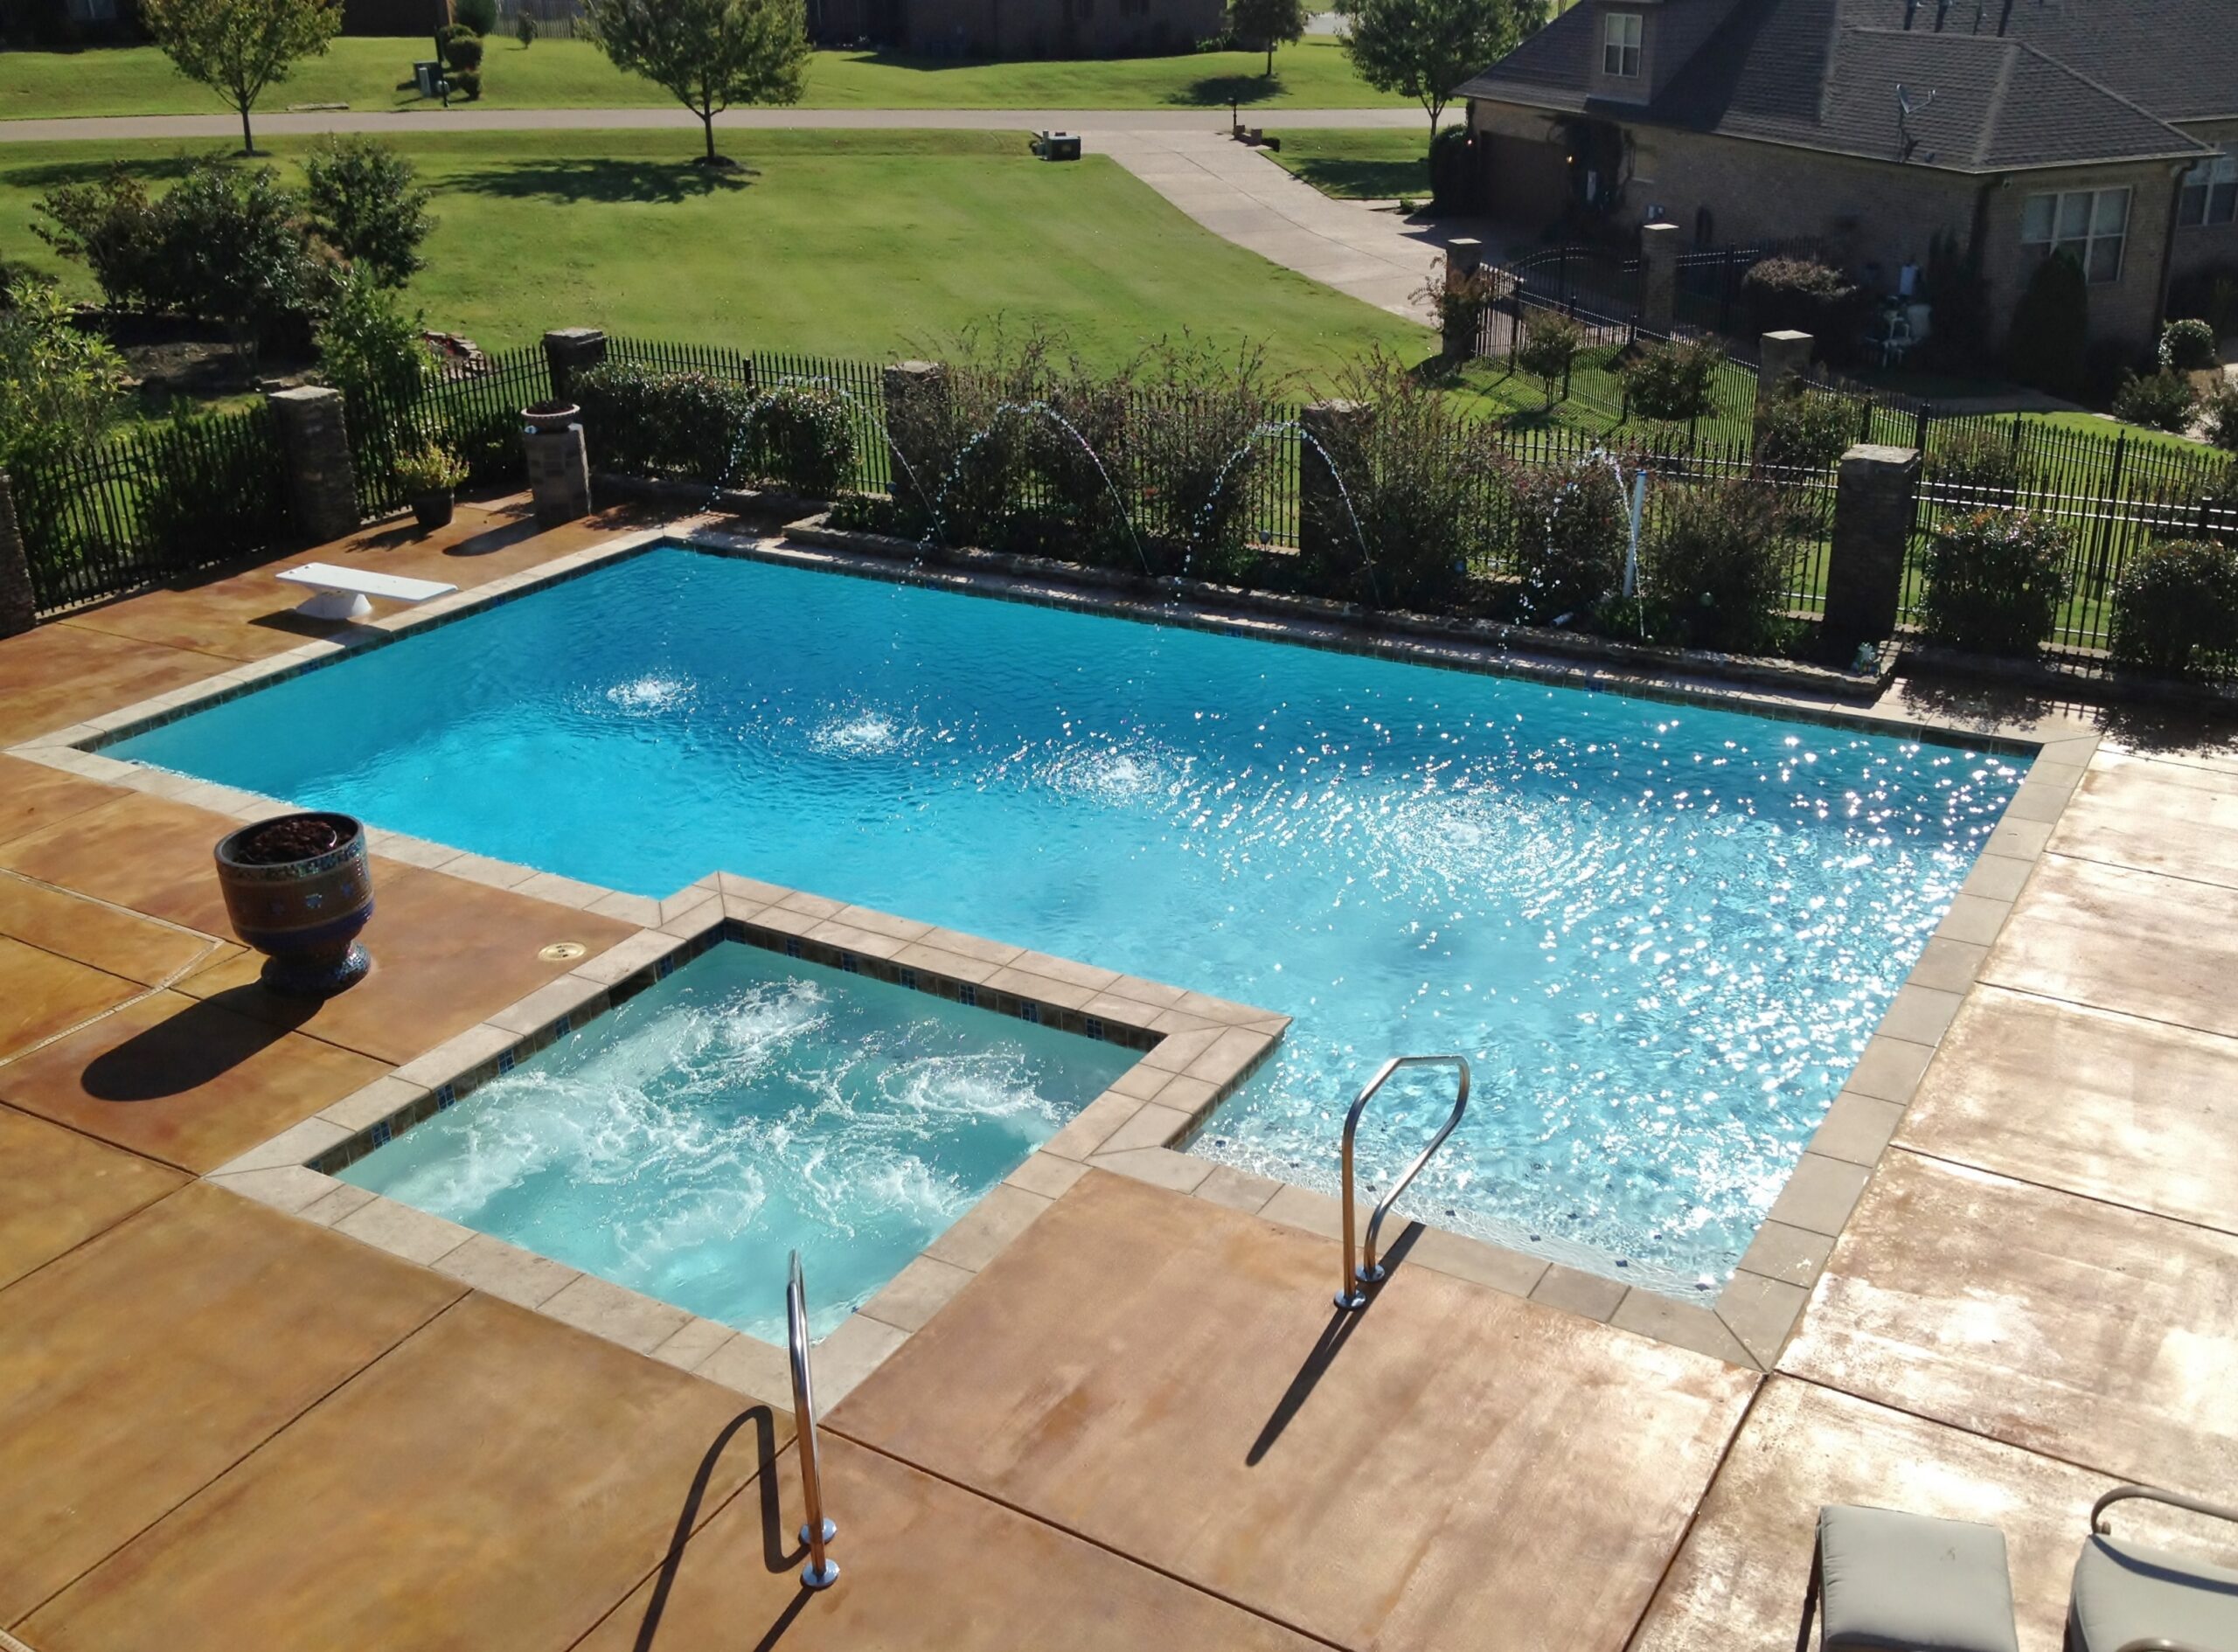 7 reasons to own a swimming pool this year